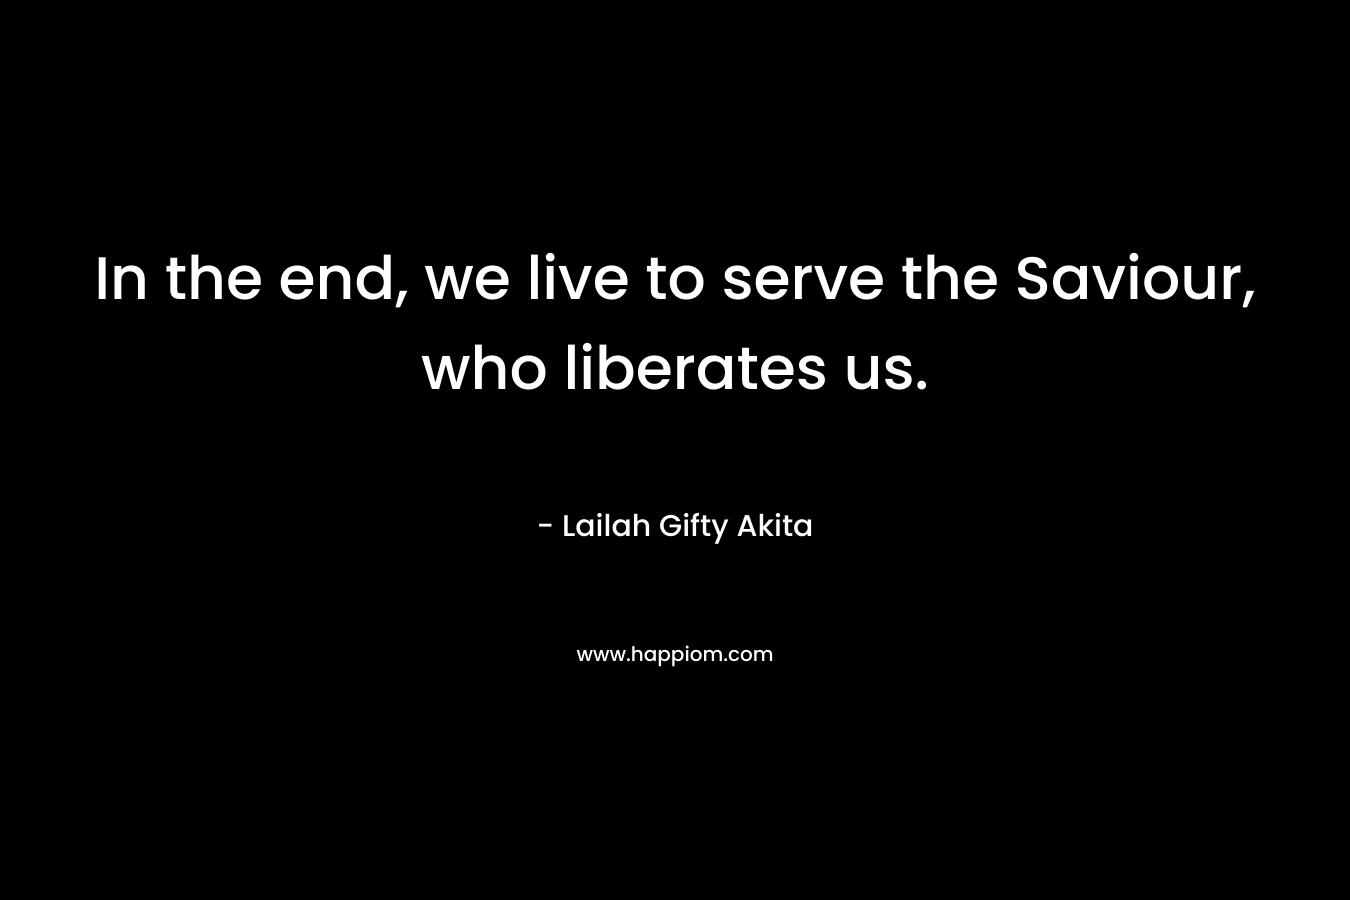 In the end, we live to serve the Saviour, who liberates us. – Lailah Gifty Akita